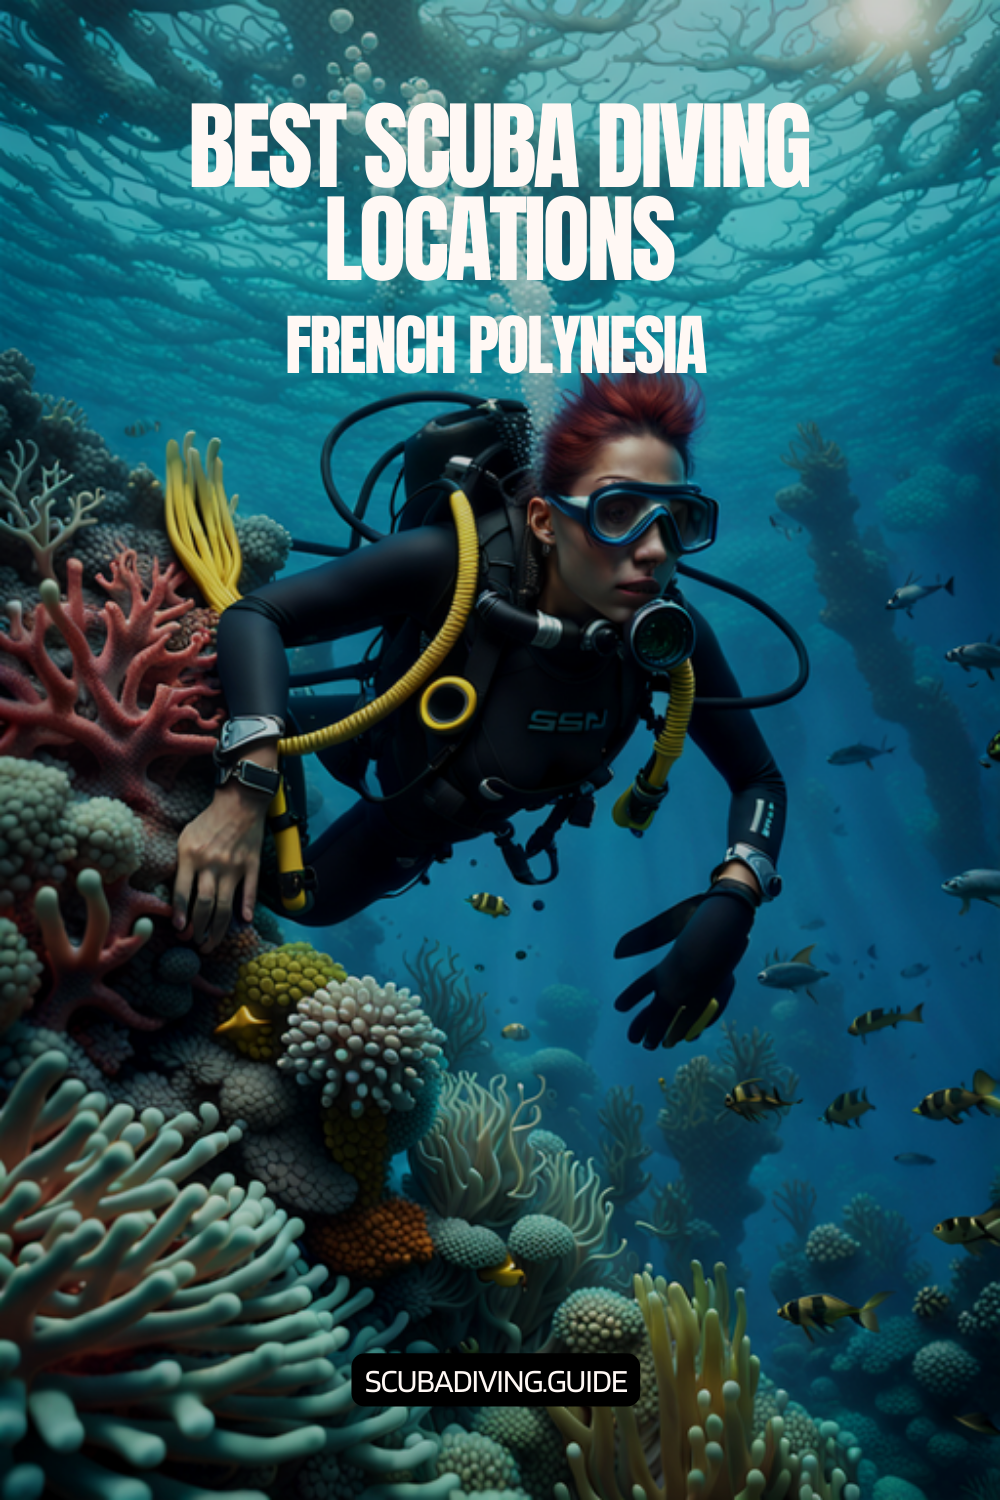 Scuba Diving Locations in French Polynesia